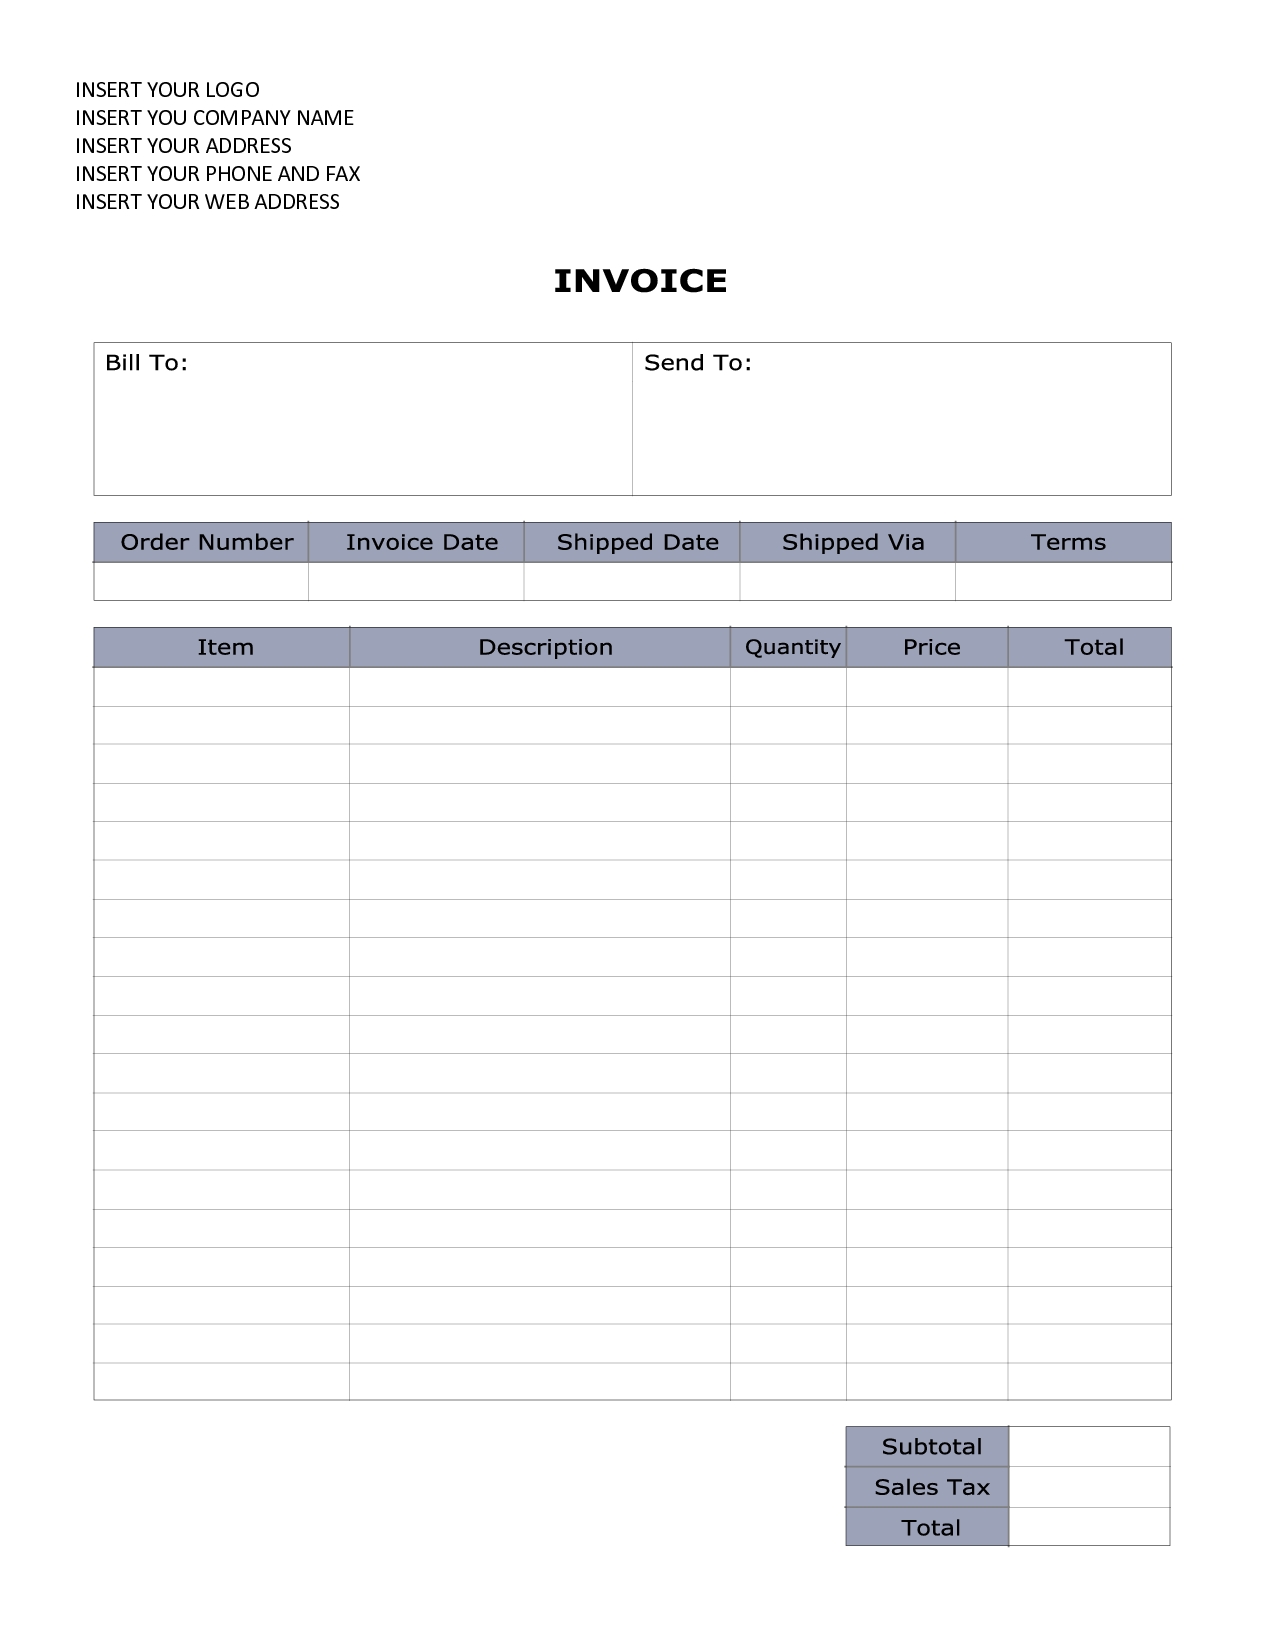 photo free invoice template word images invoice templates word